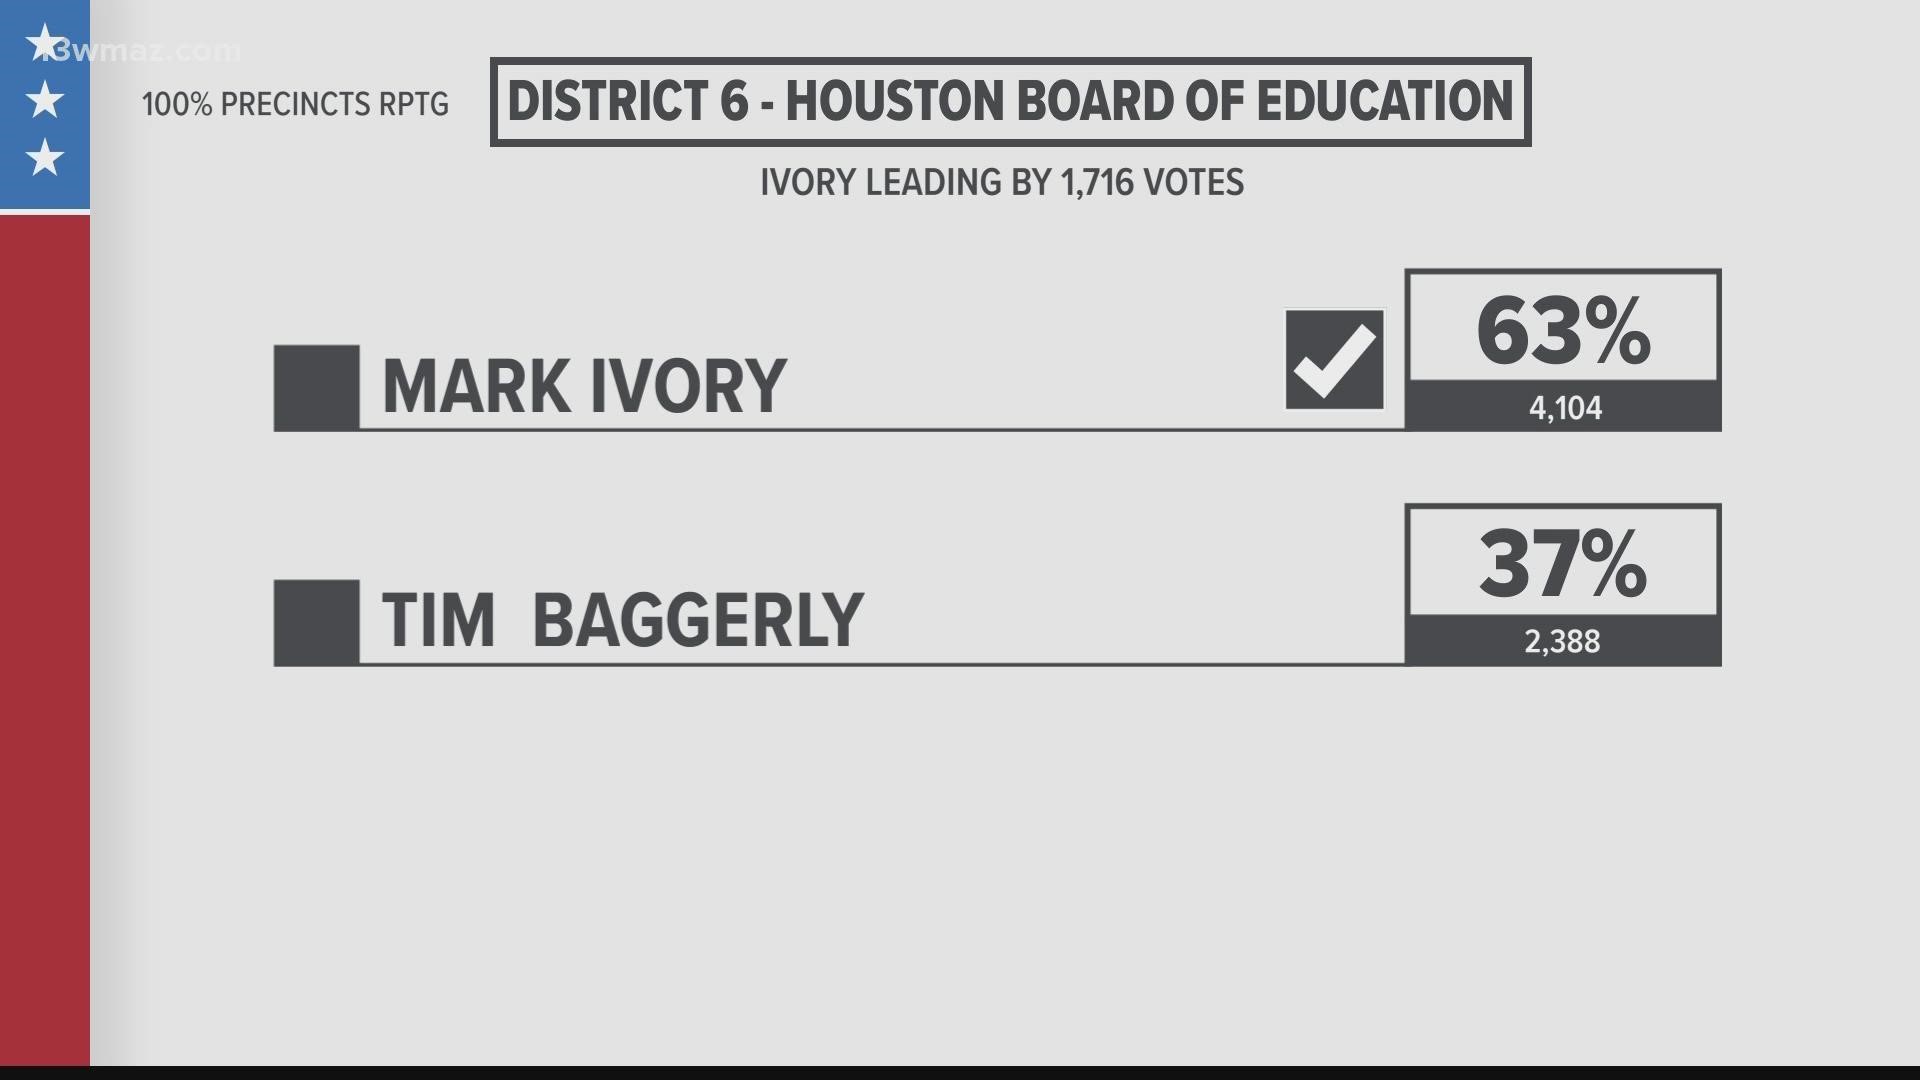 Ivory received 4,104, or 63% of the votes, and Baggerly got 2,388, or 37% of votes.